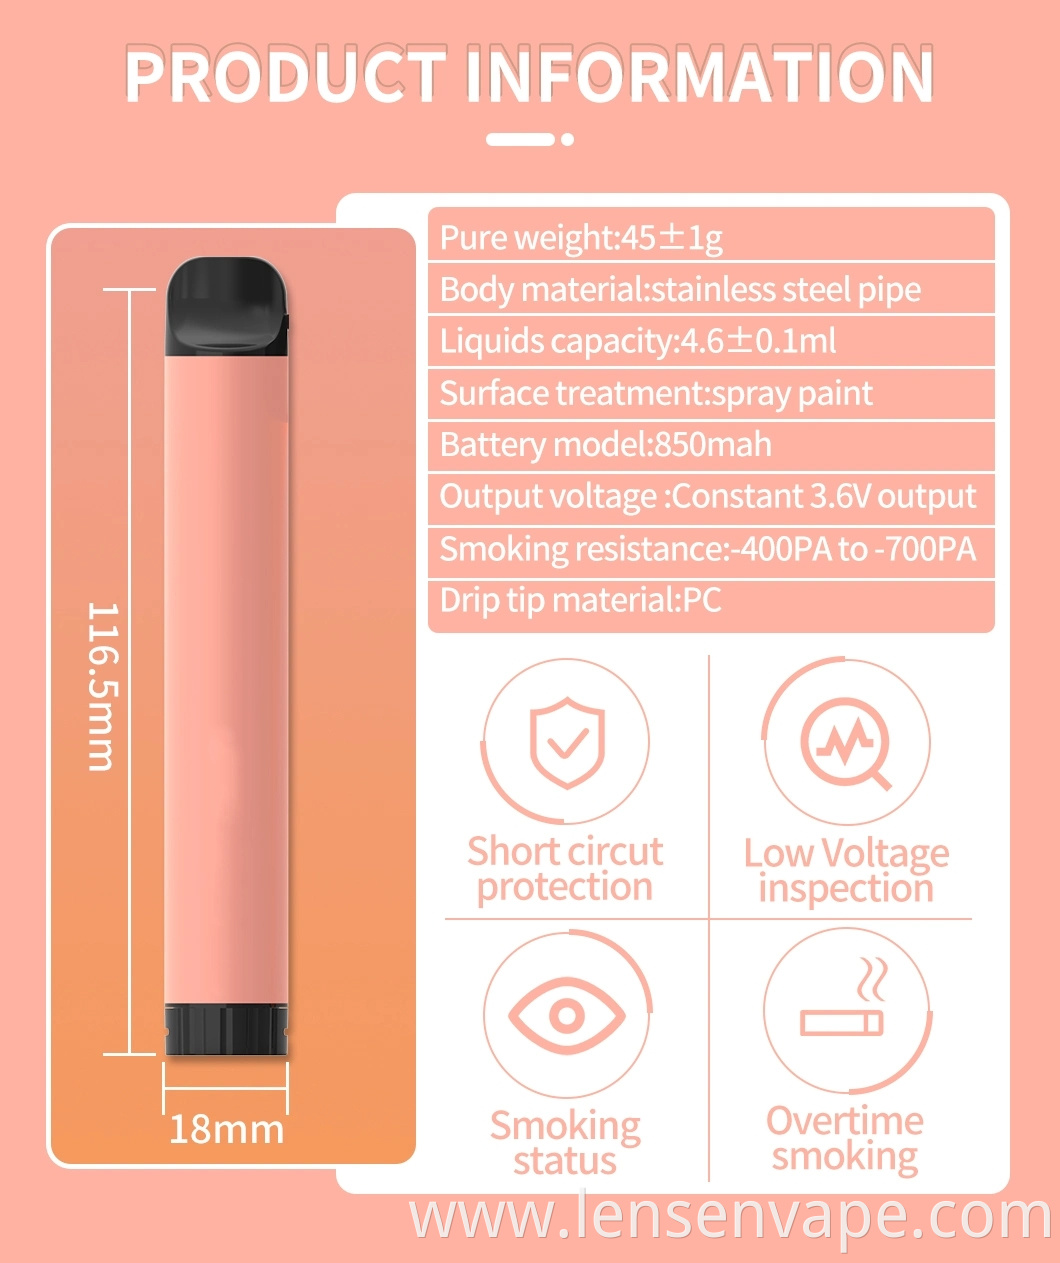 B.New-Listed-Eight-Colors-850mAh-Battery-4-6ml-Liquid-Capacity-Professional-Healthy-Environmental-Protection-Disposable-E-Cigarette.webp